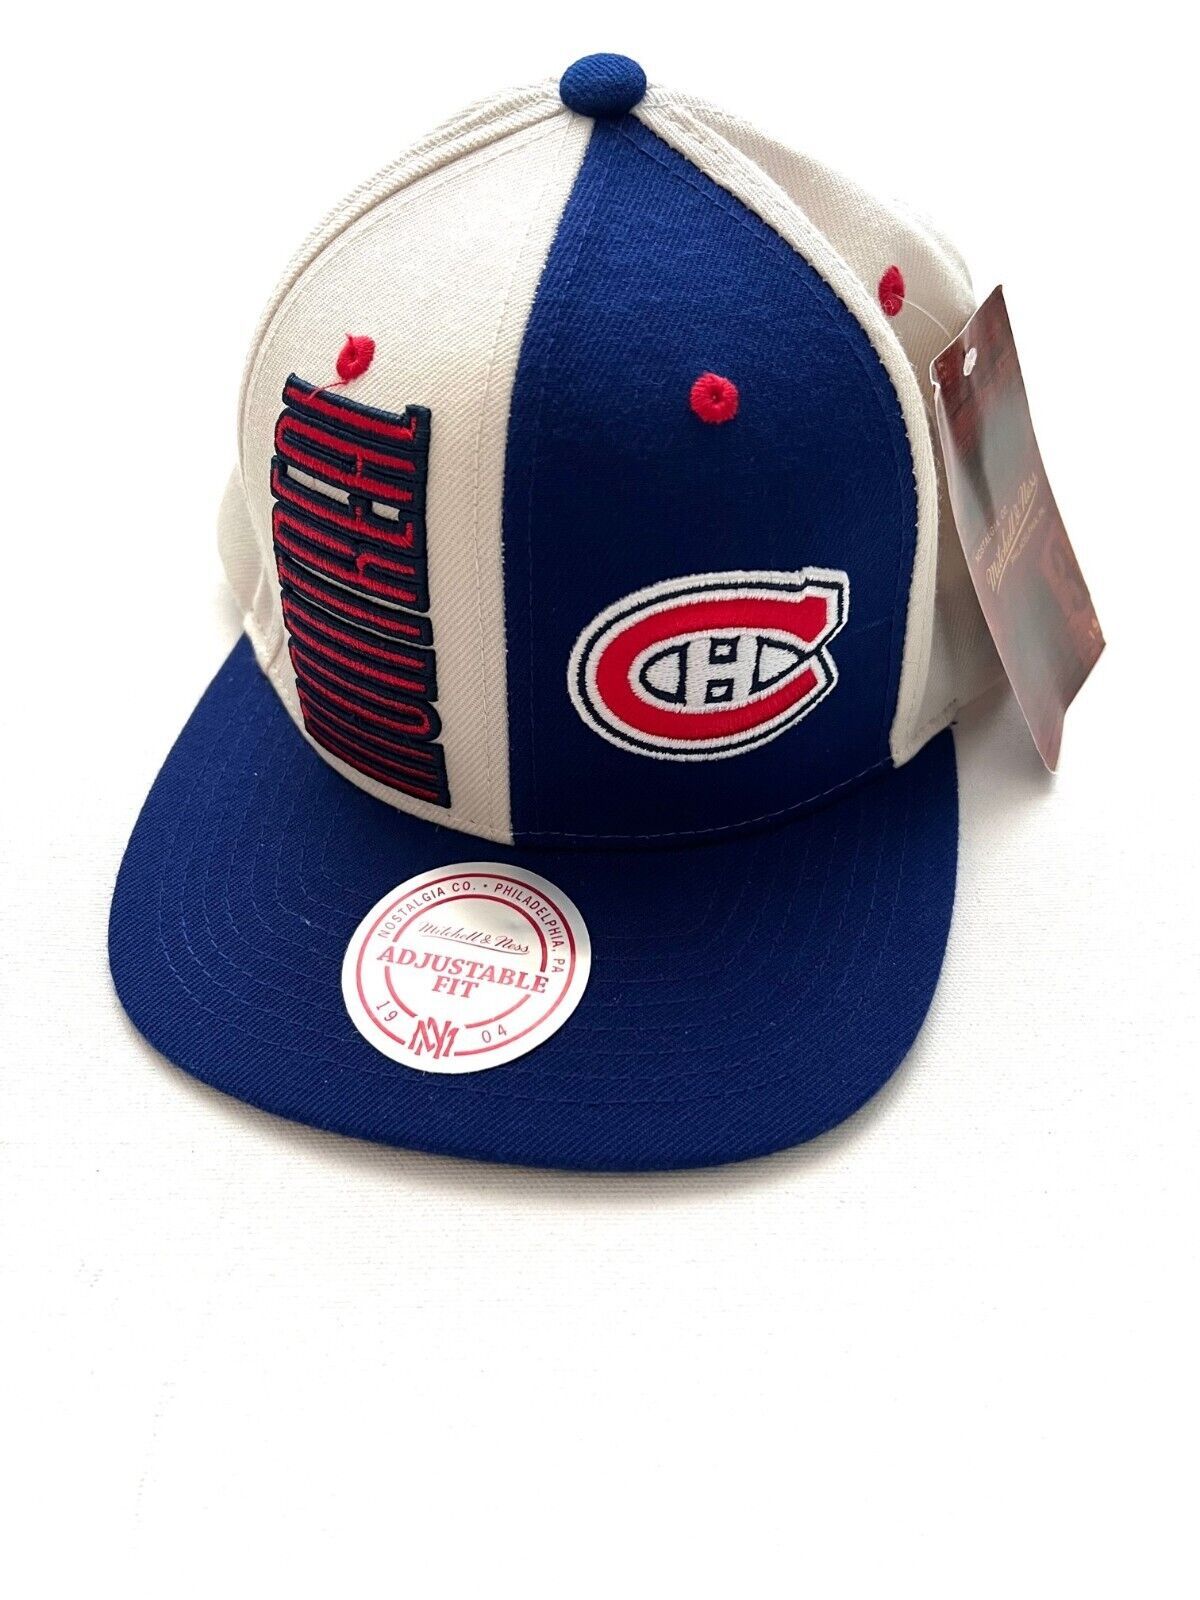 Primary image for Mitchell & Ness Montreal Canadians Hockey Hat Cap